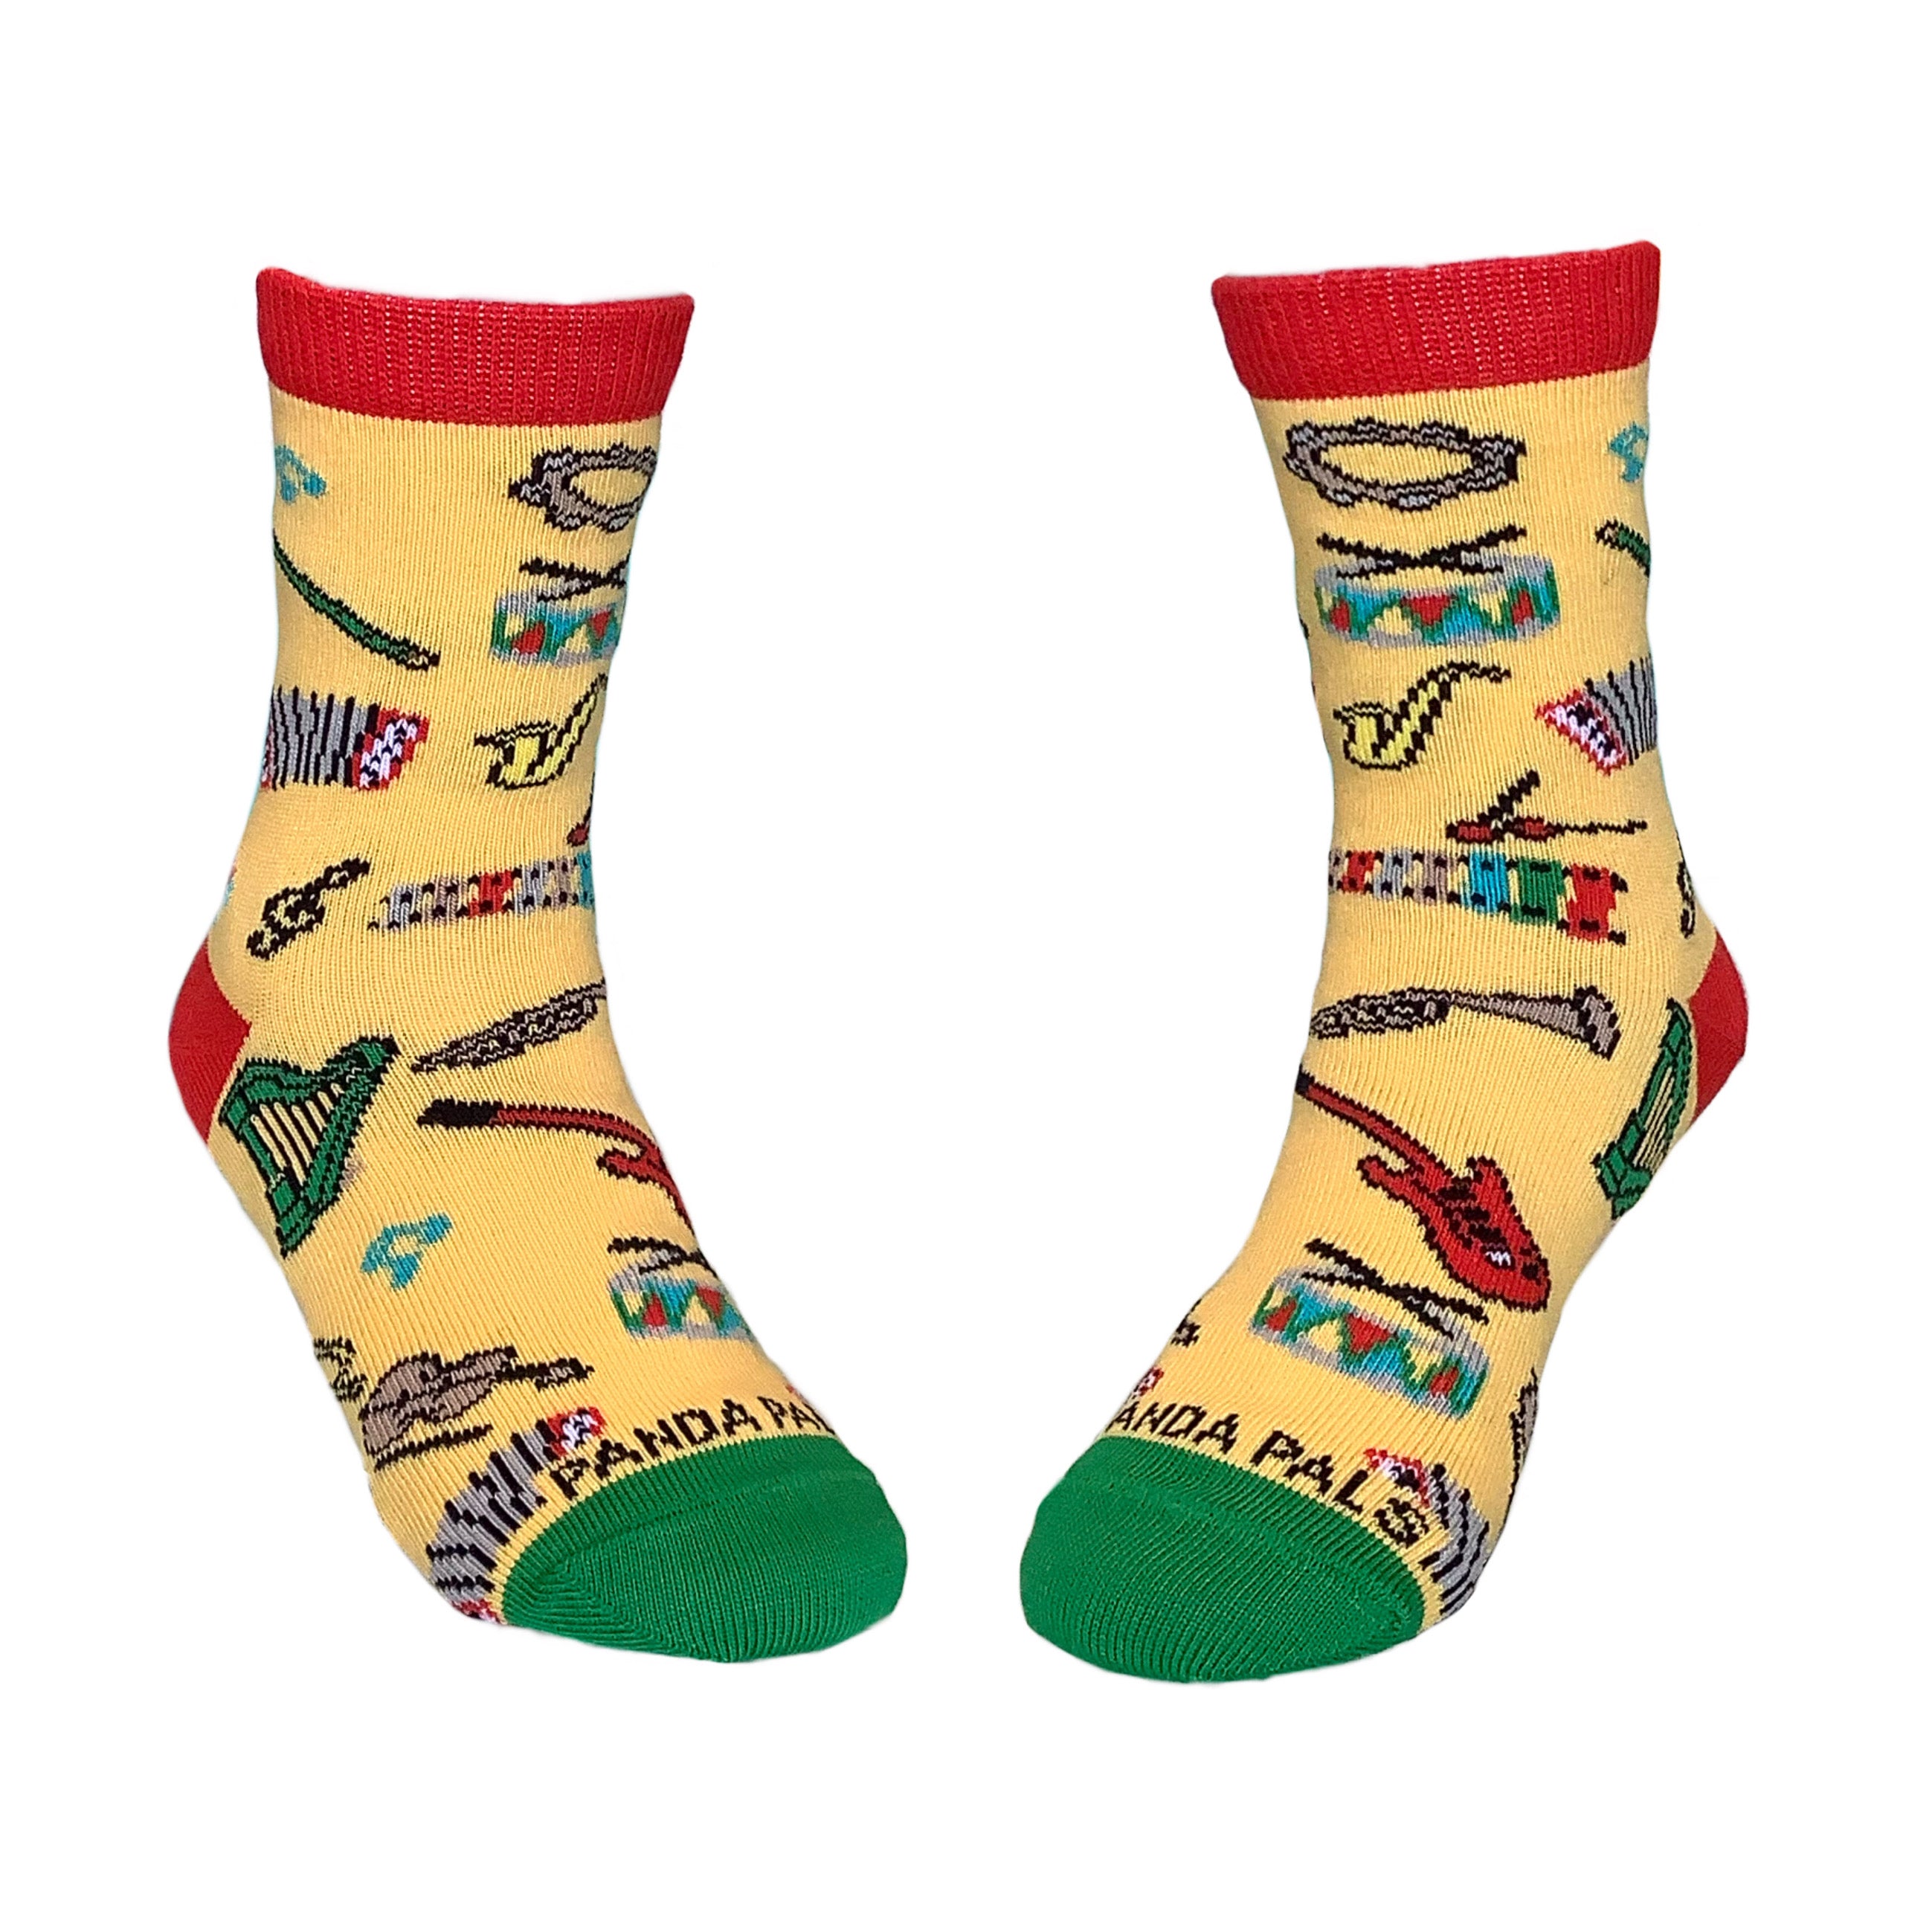 Fun Music Instruments Socks (Ages 3-7) from the Sock Panda